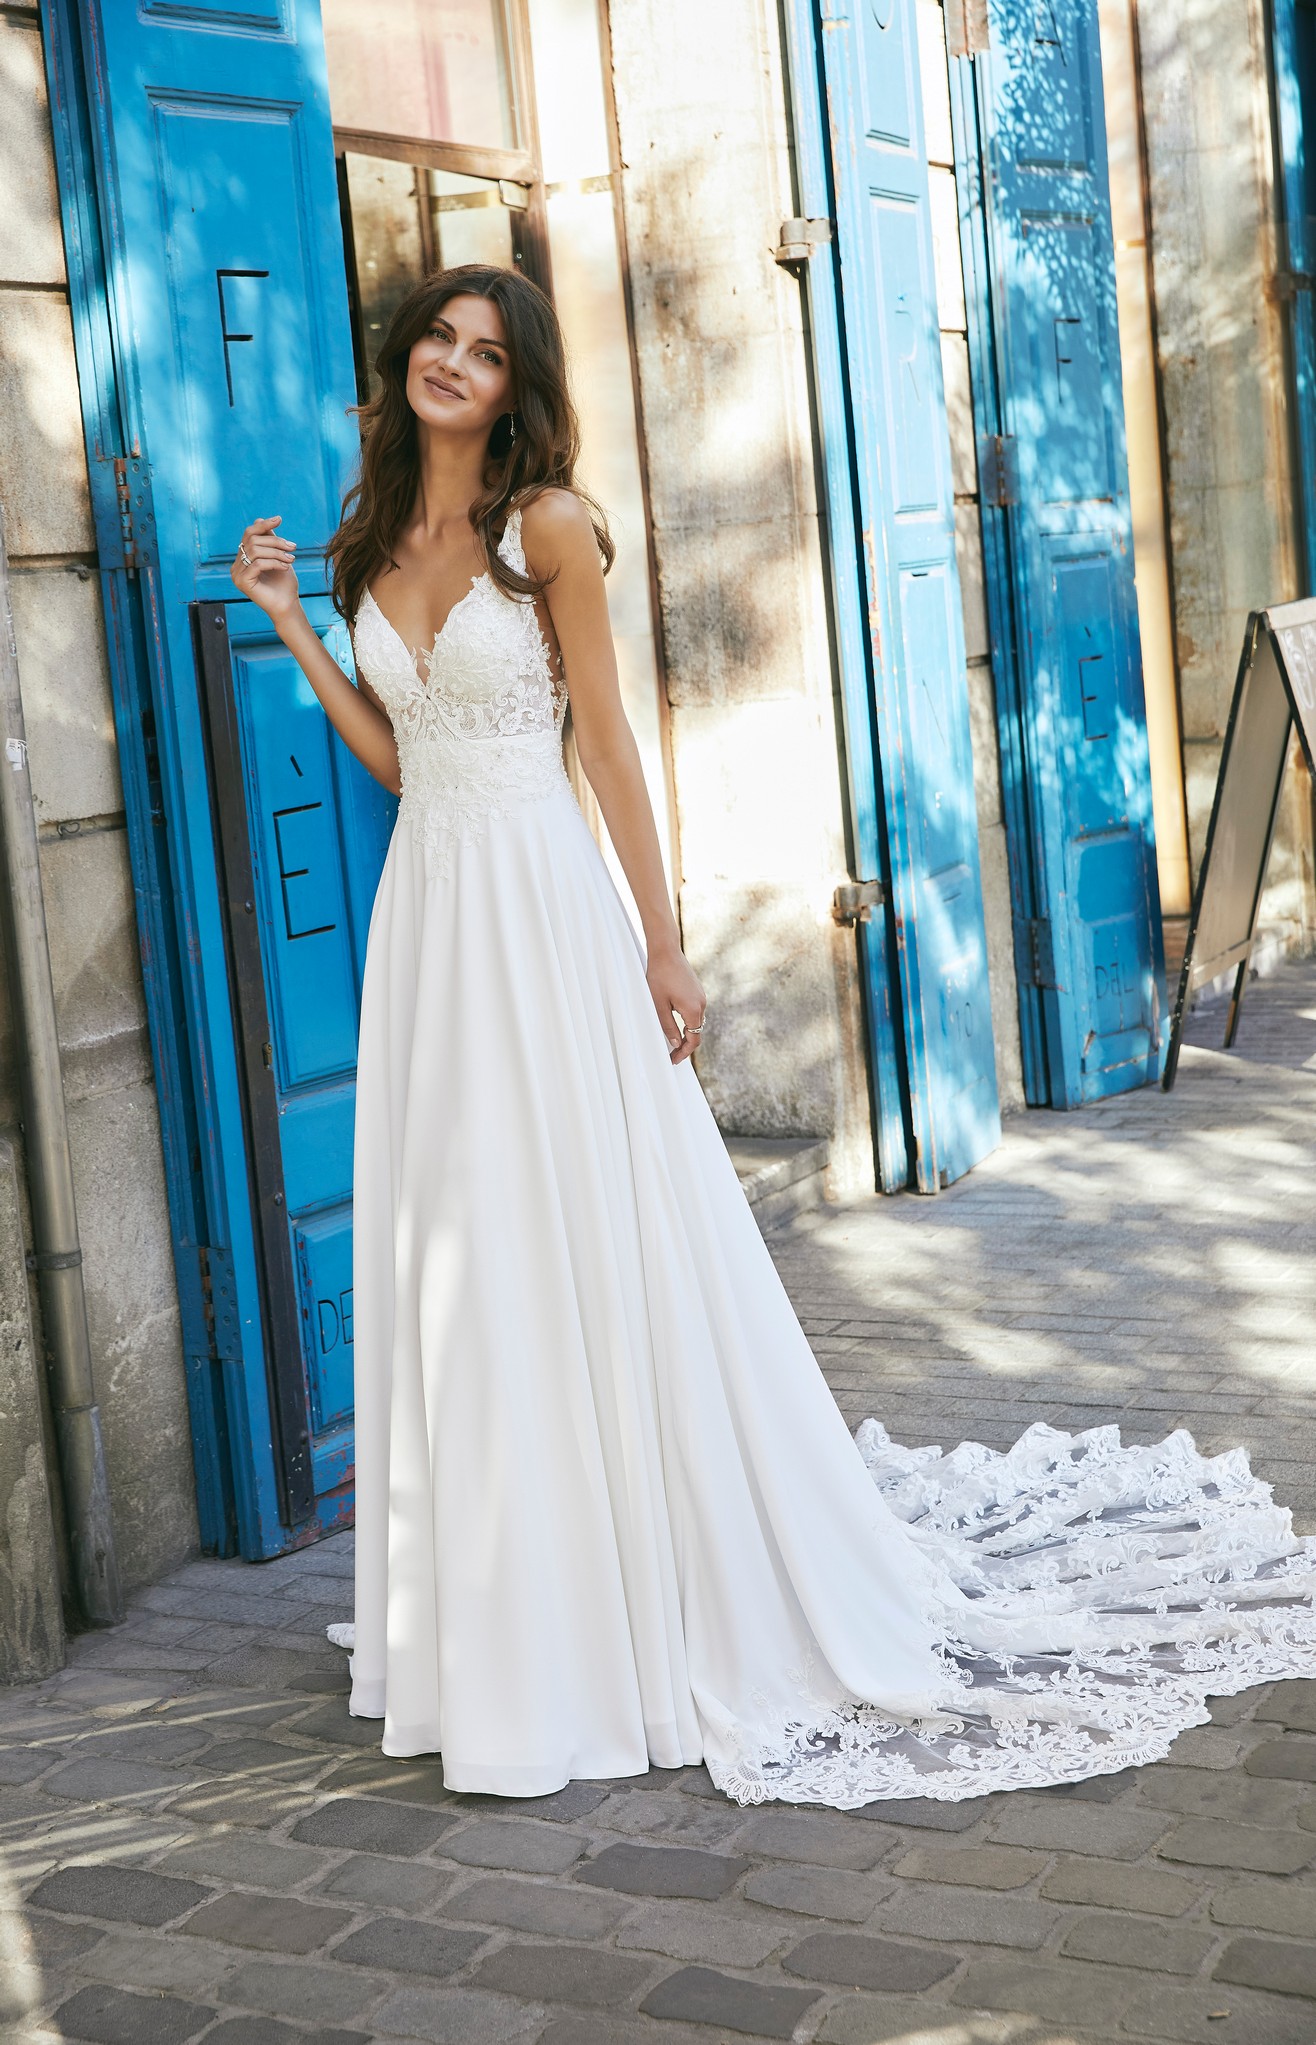 Model in Ronald Joyce destination wedding dress style 18618, a beautiful crepe and lace A-line dress with a plunging v-neckline and open back detail 